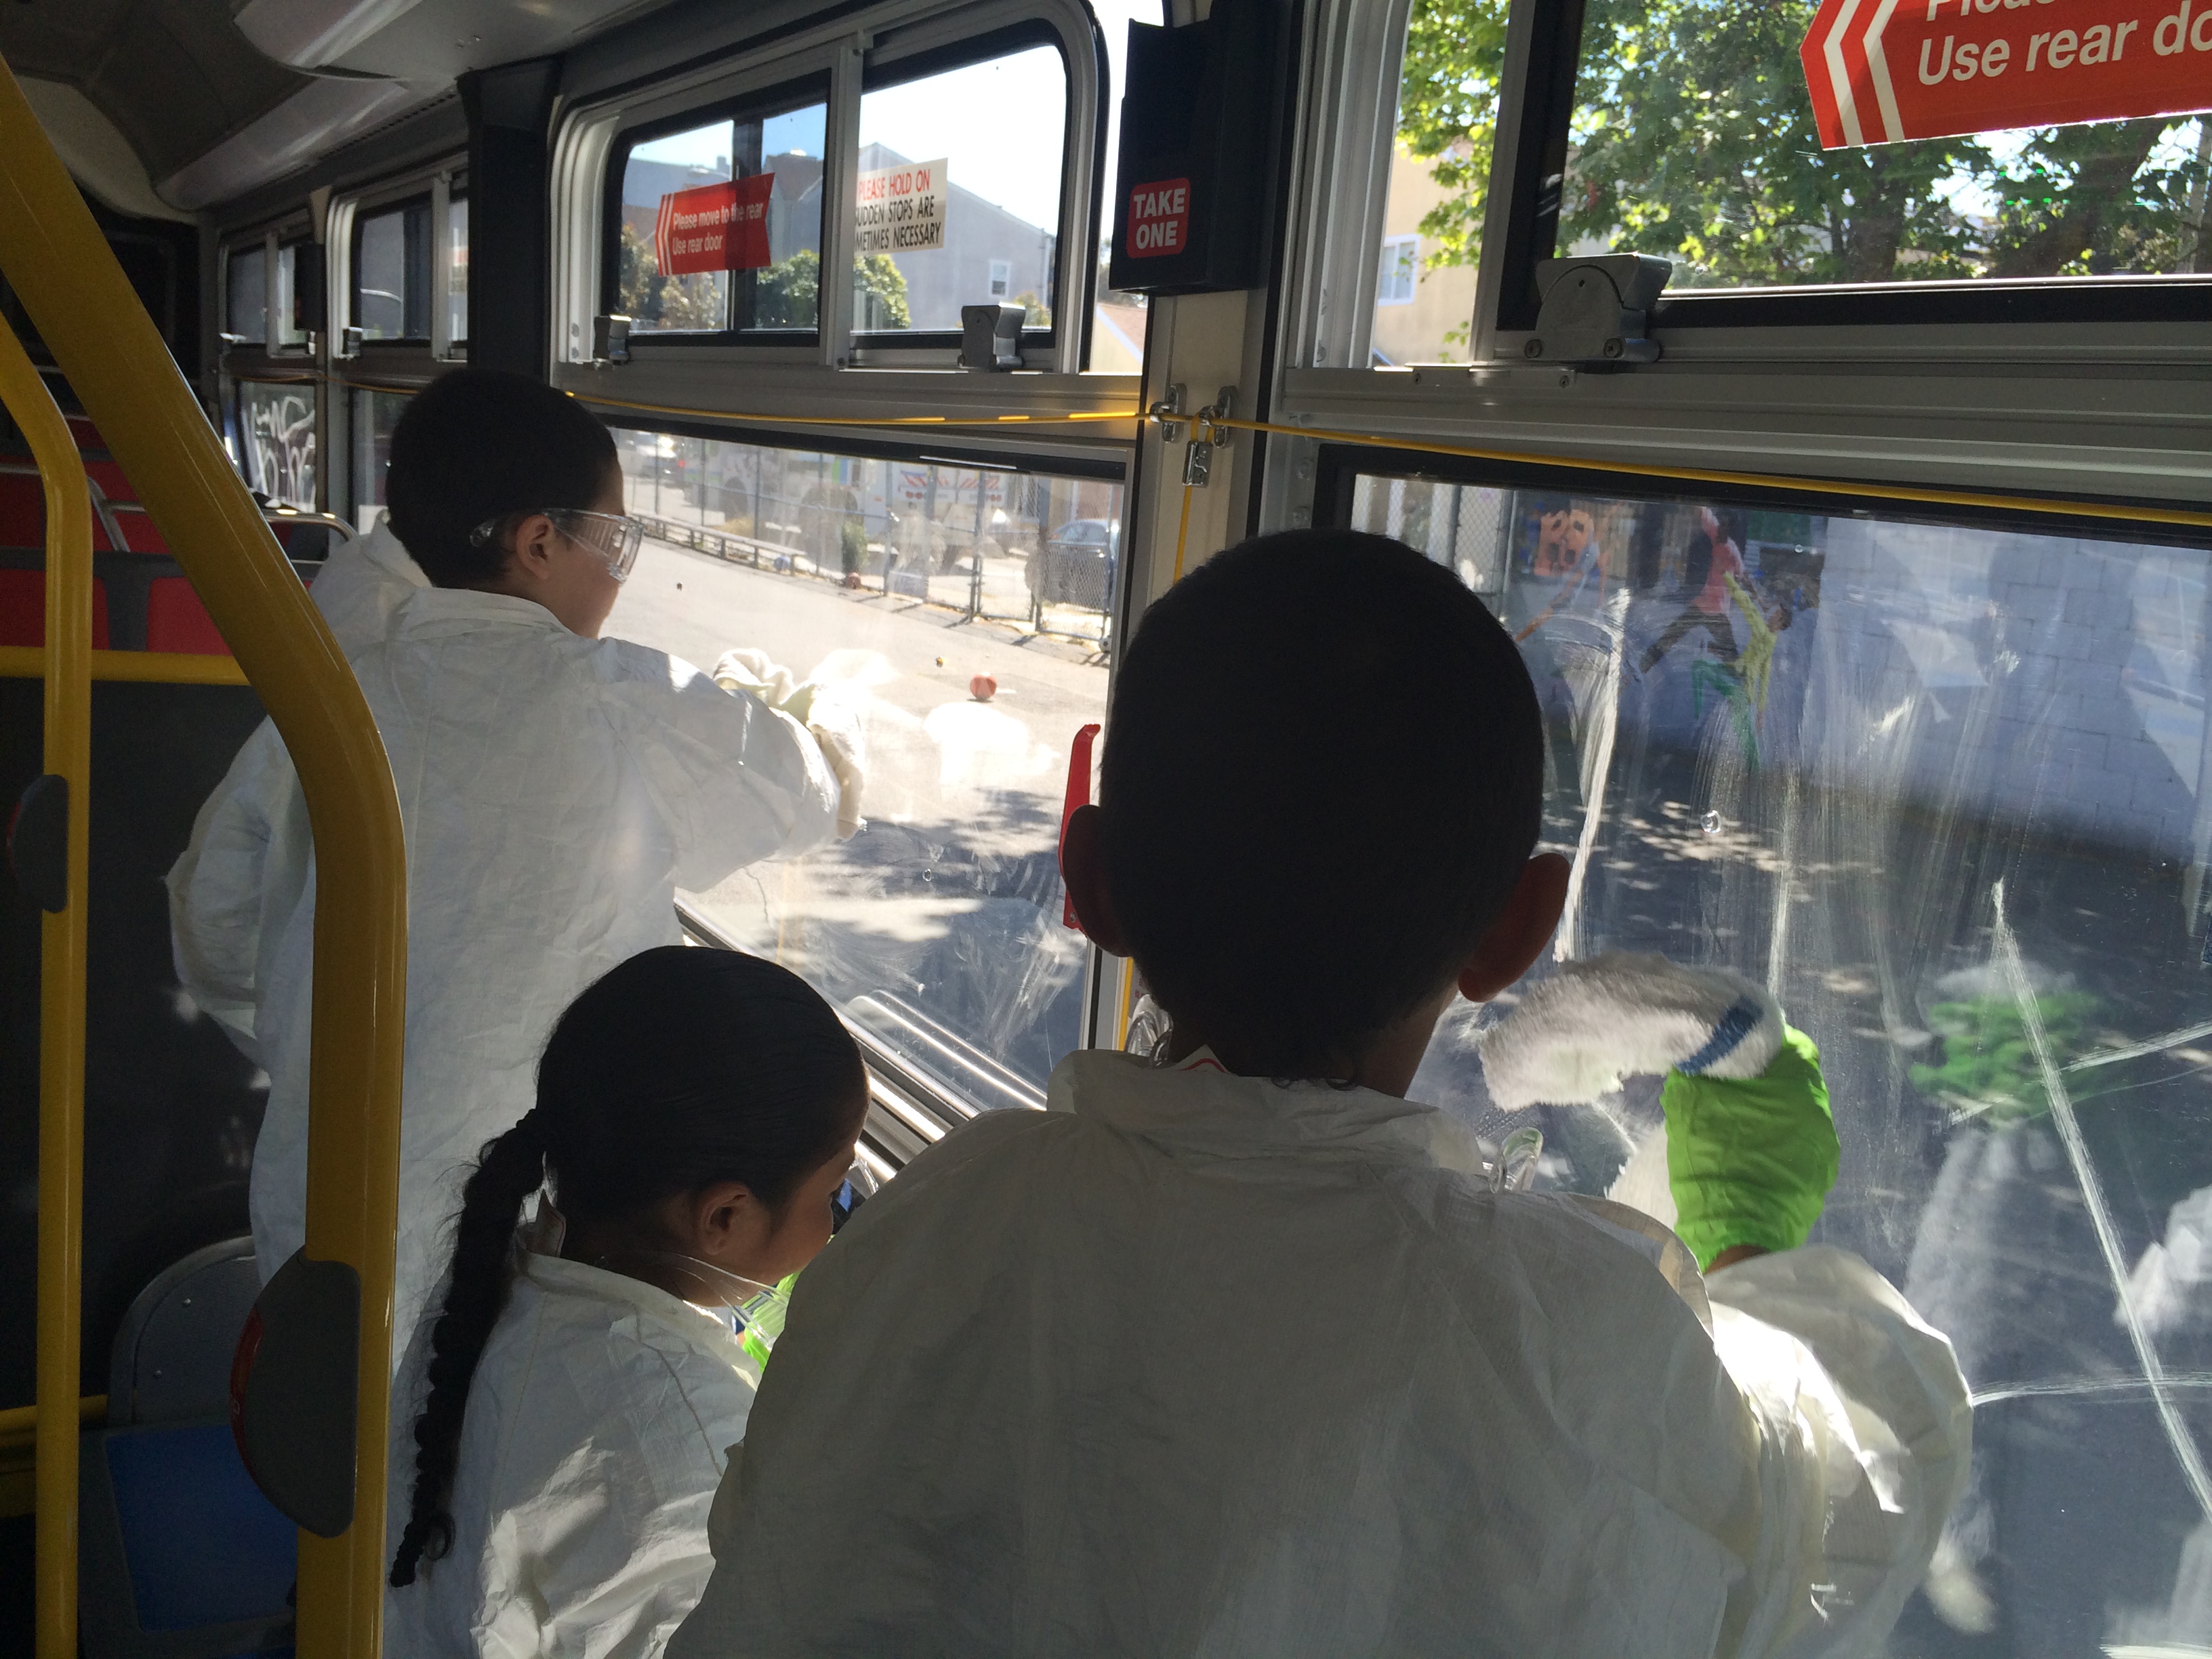 Three young children in white smocks and green gloves clean a window inside of a Muni bus